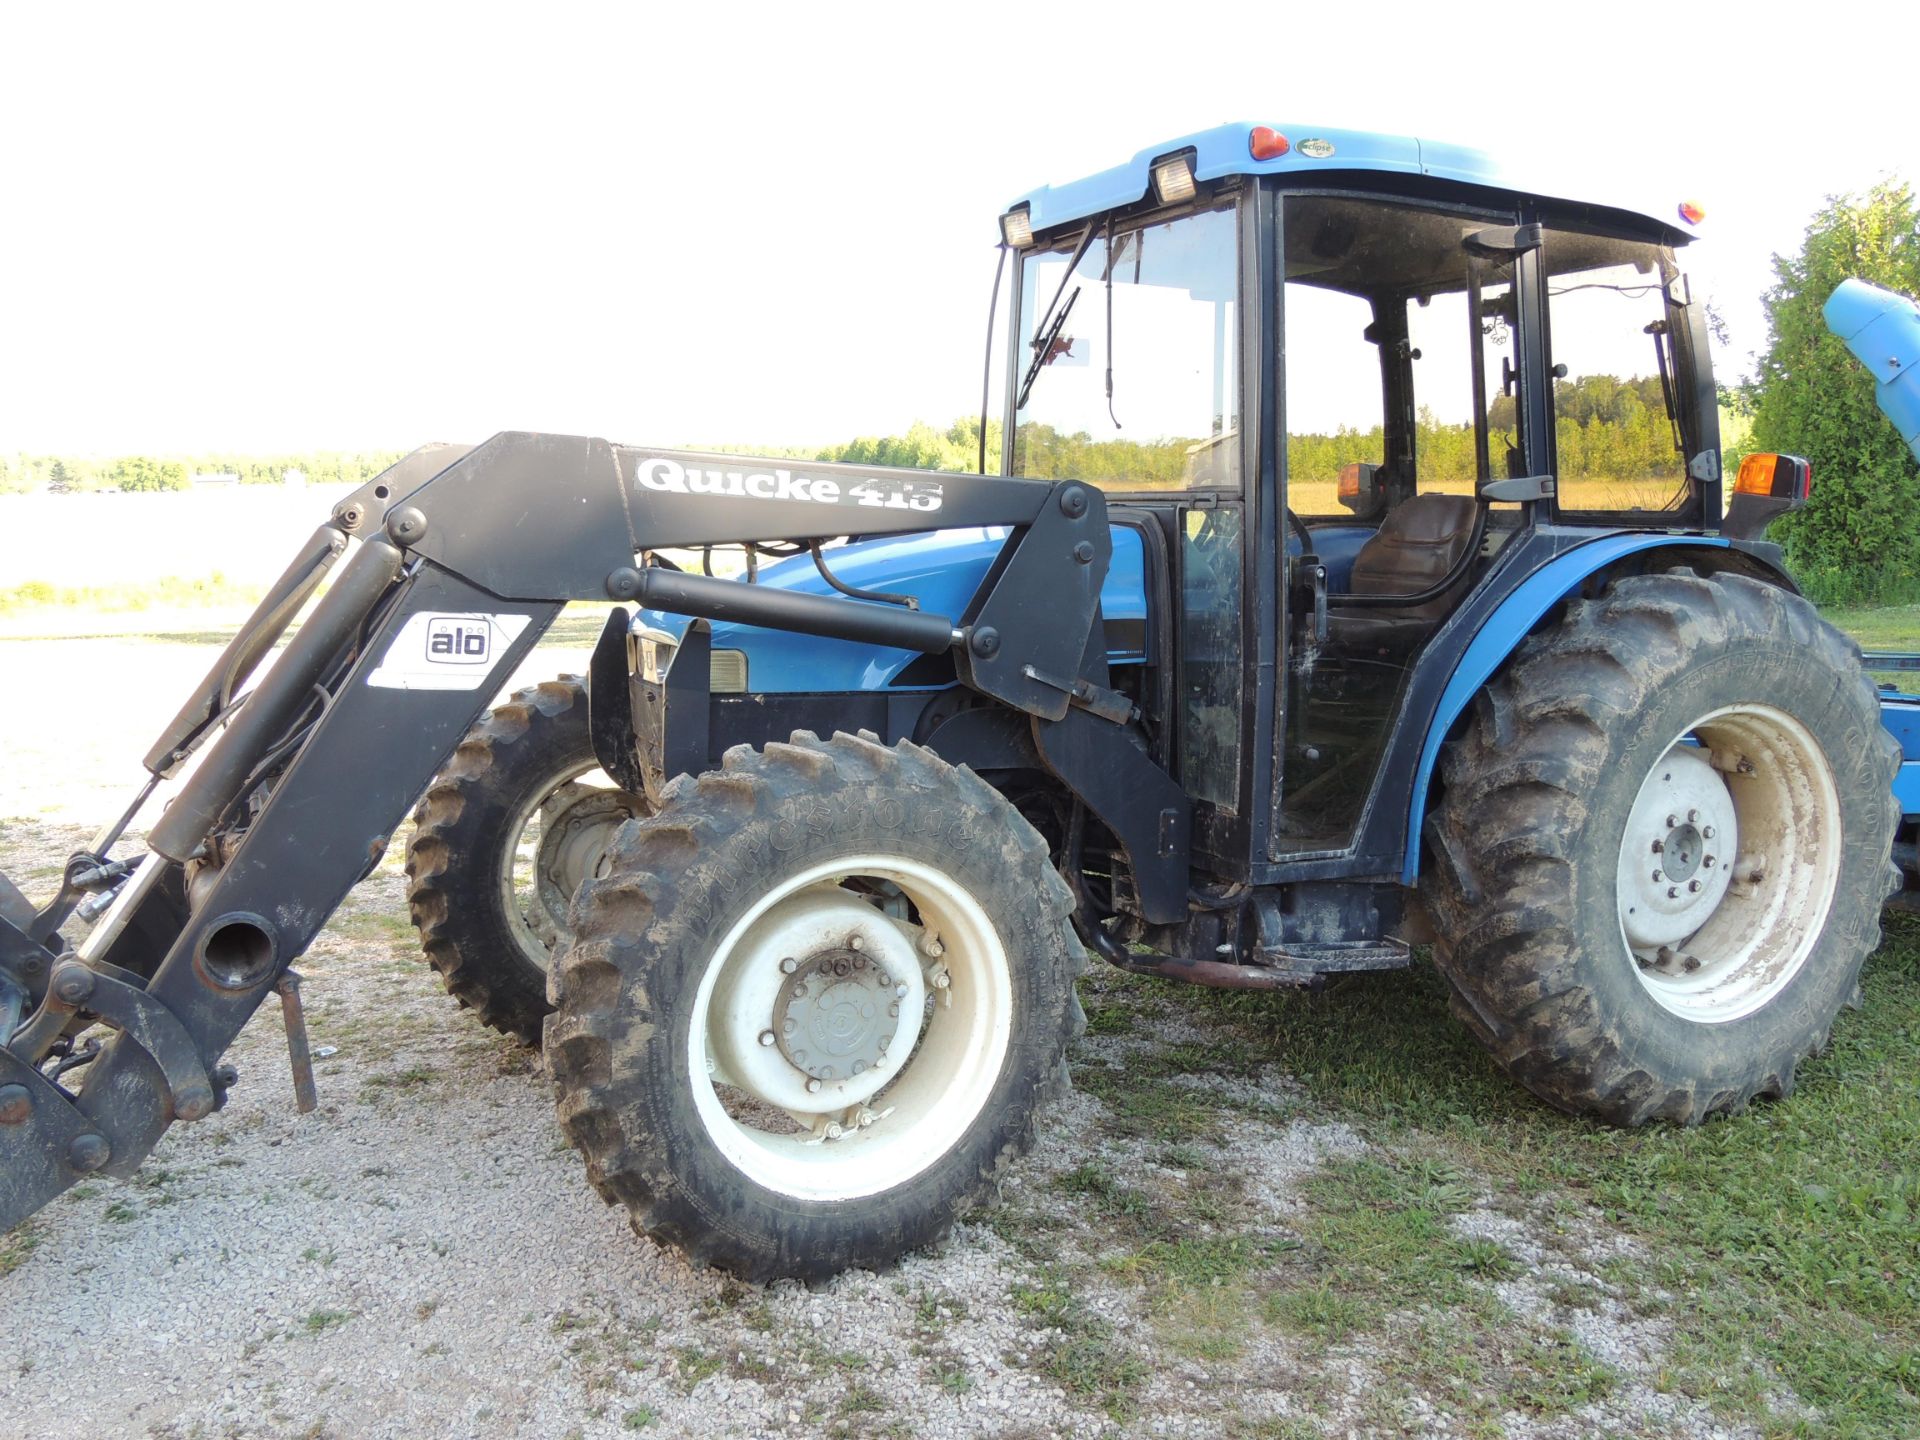 NEW HOLLAND TN75S DIESEL TRACTOR WITH IVECO 2.9L 3 CYLINDER ENGINE, 16.9-30 REAR TIRES, ENCLOSED - Image 2 of 5